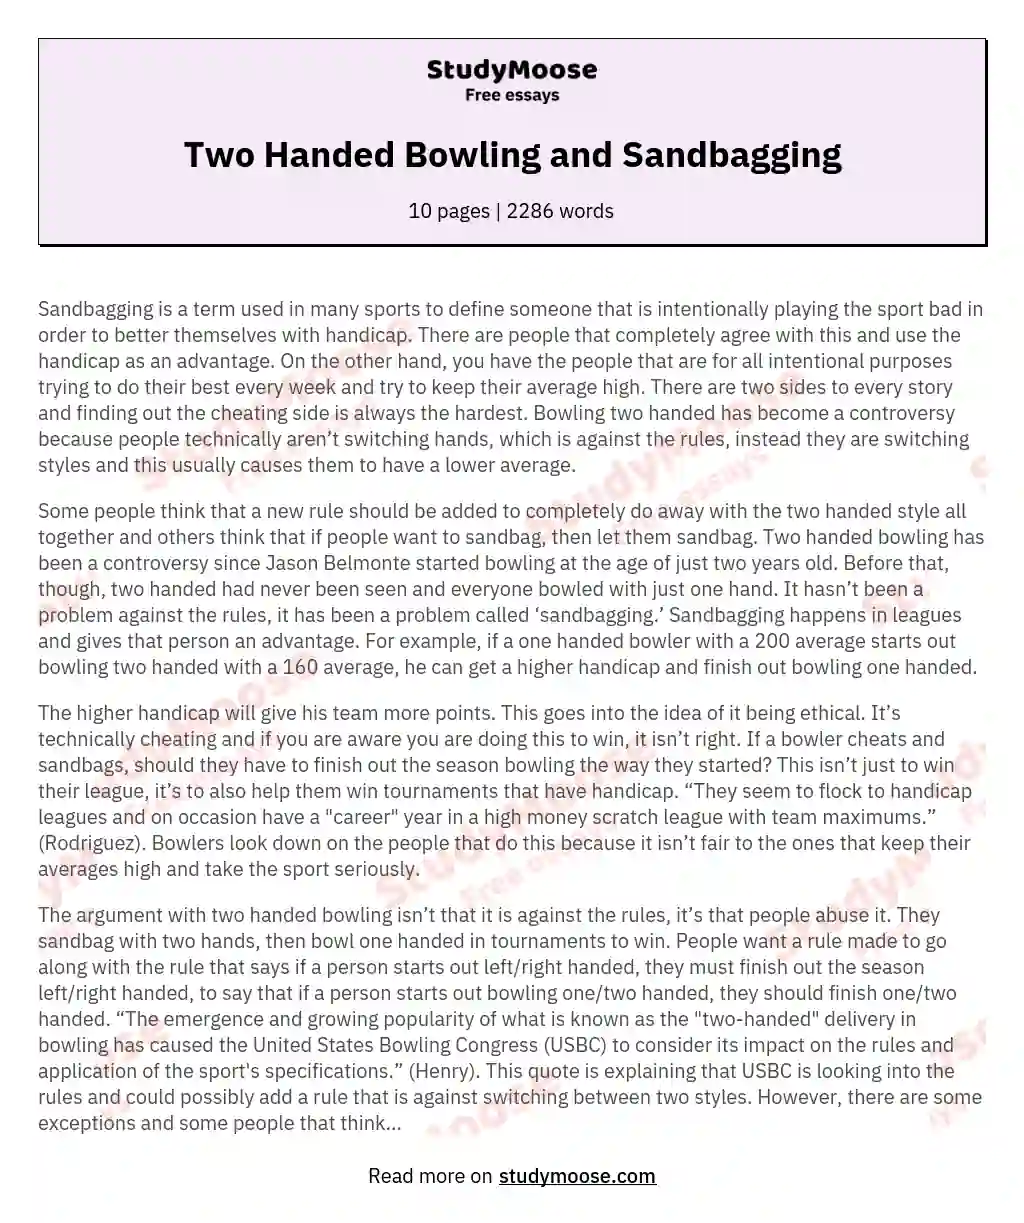 Two Handed Bowling and Sandbagging essay